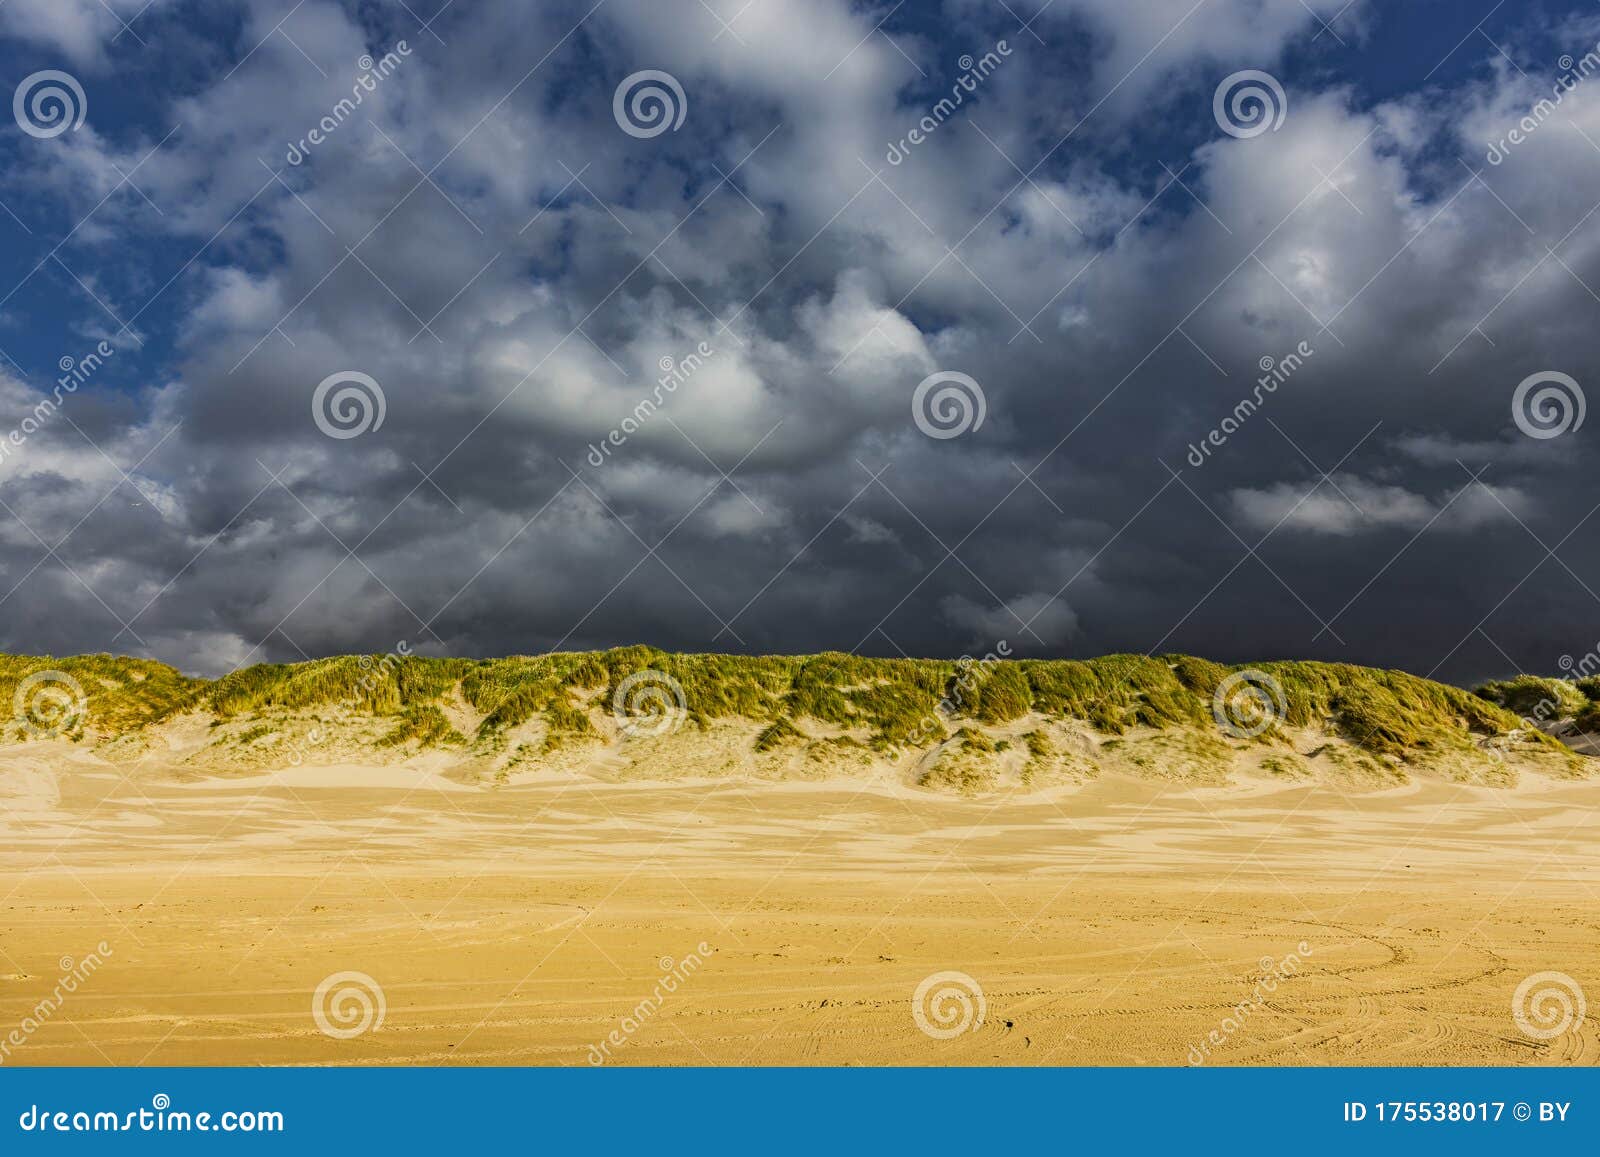 evening mood with stromy clouds in dune landscape